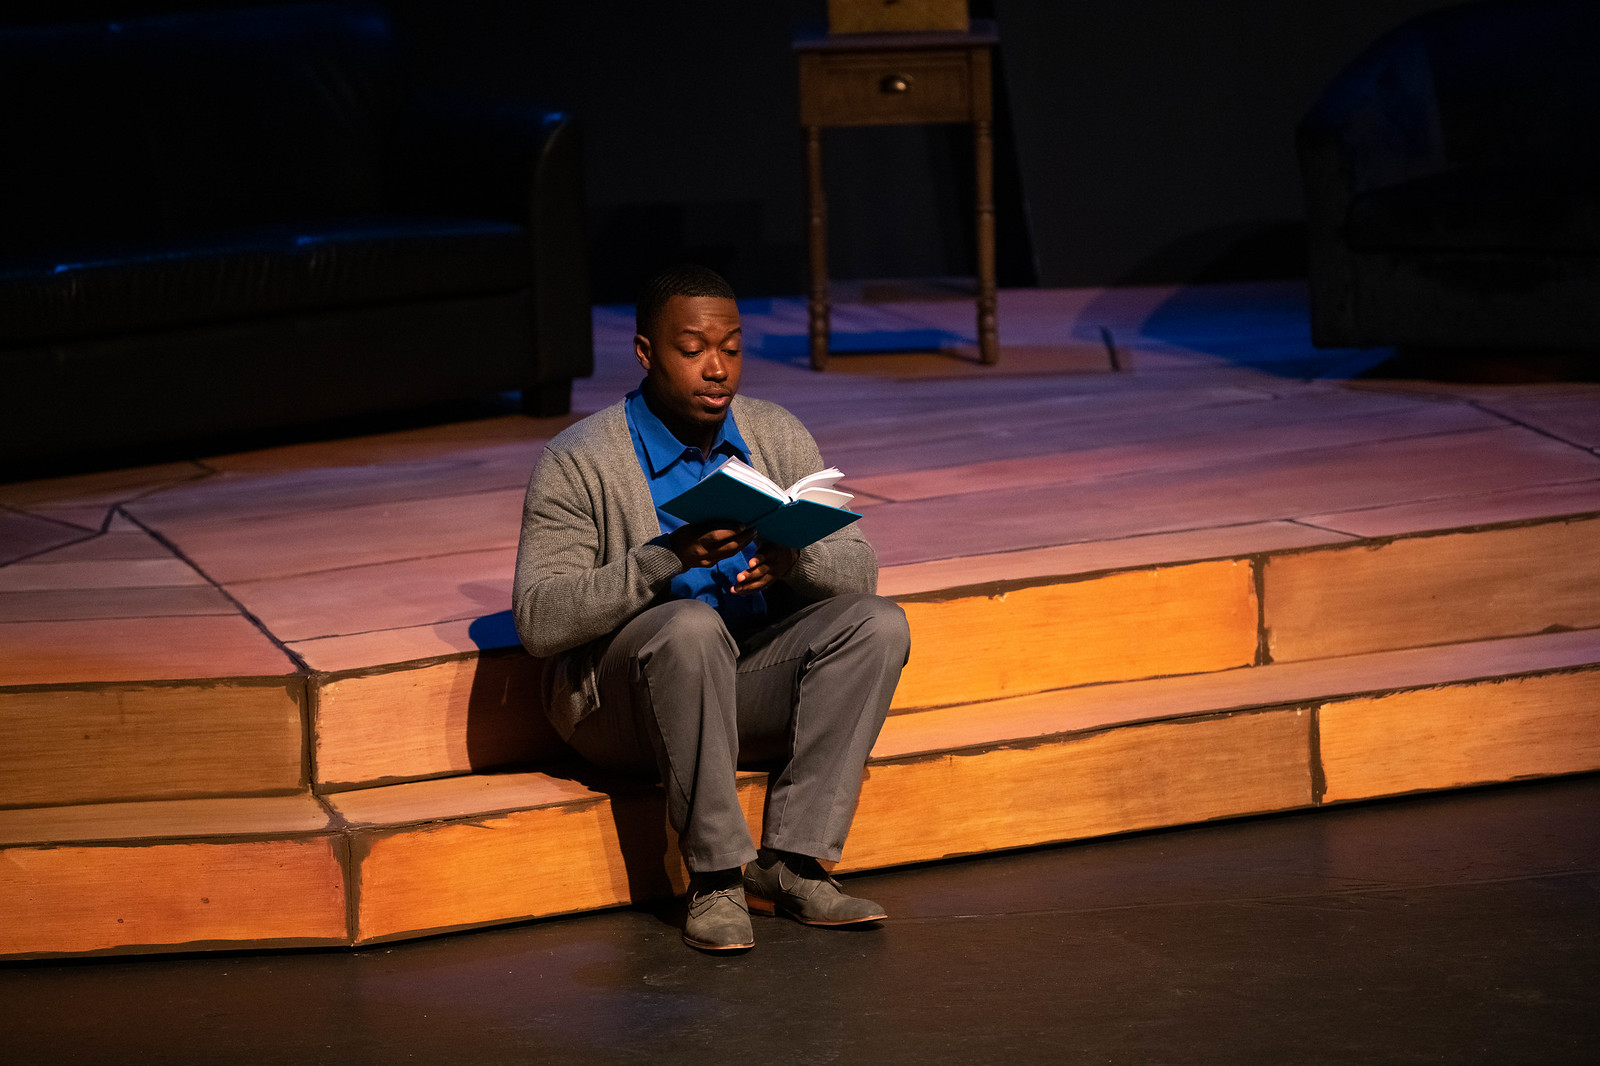 a male student sitting and reading a book in a play